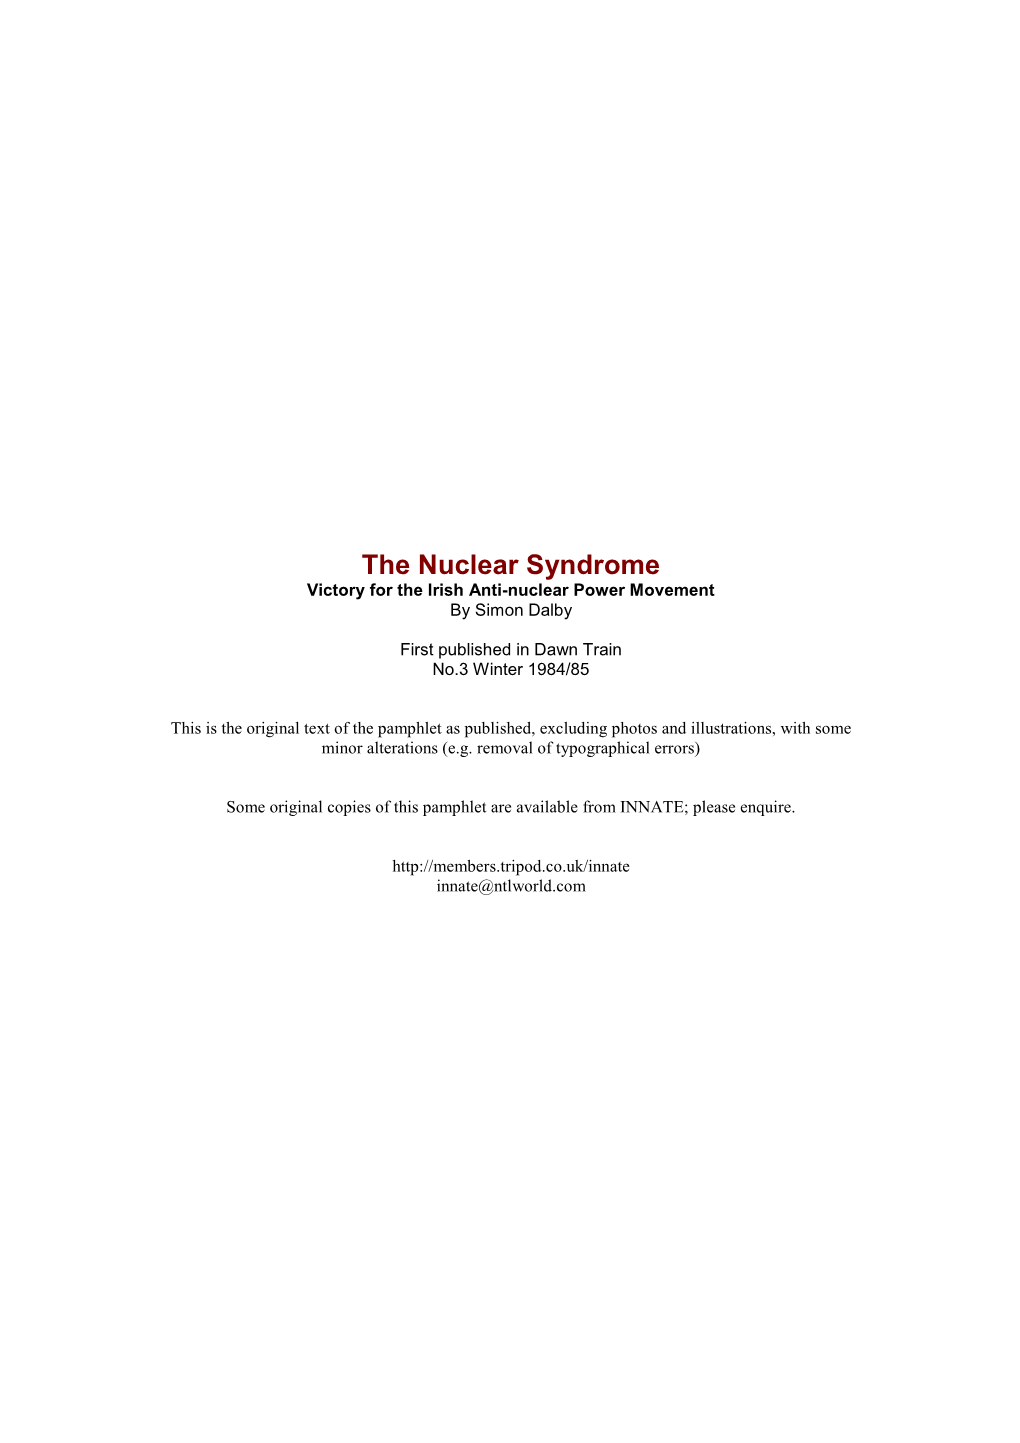 The Nuclear Syndrome. Victory for the Irish Anti-Nuclear Power Movement